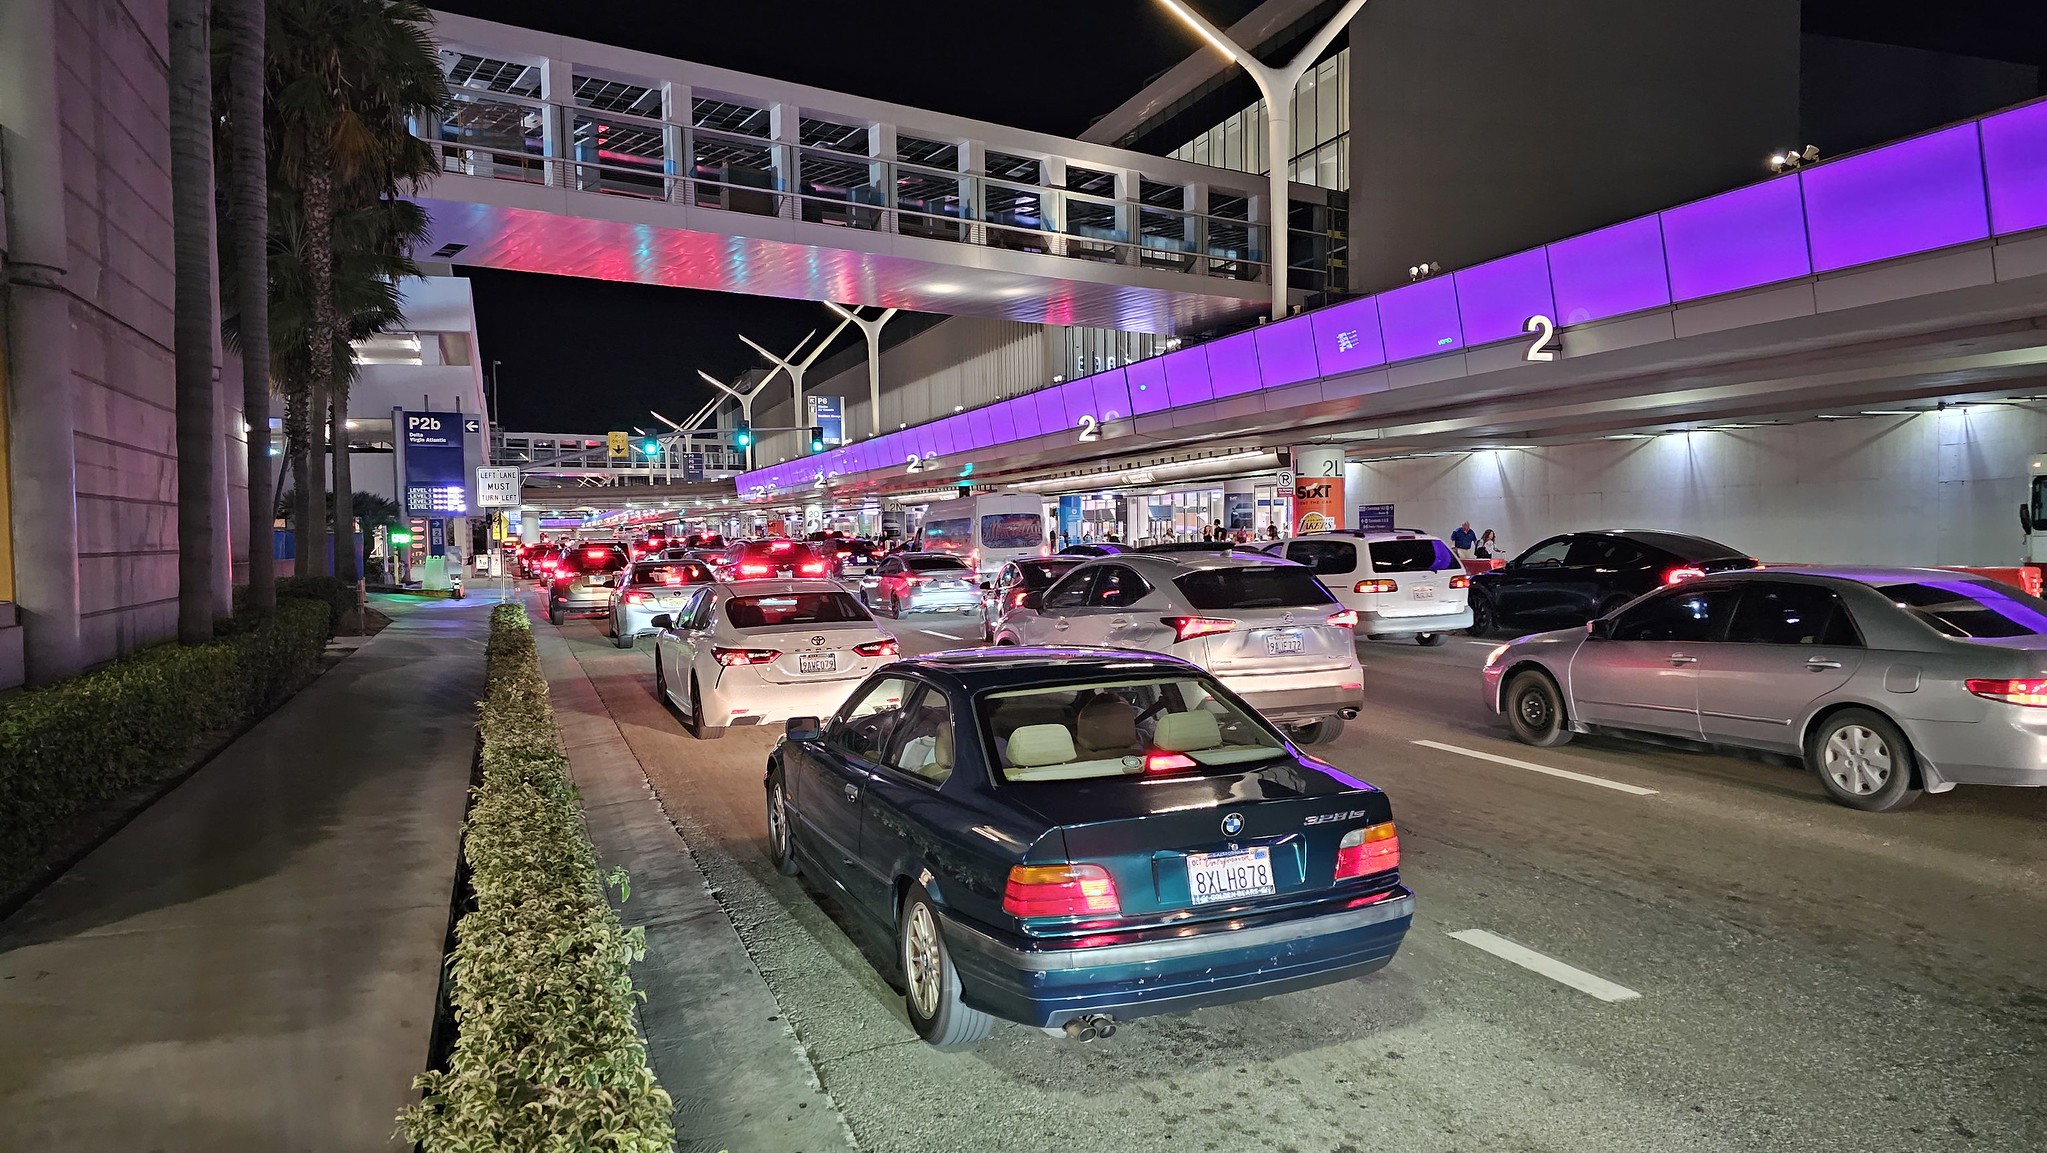 LAX is one crazy airport in the evening!